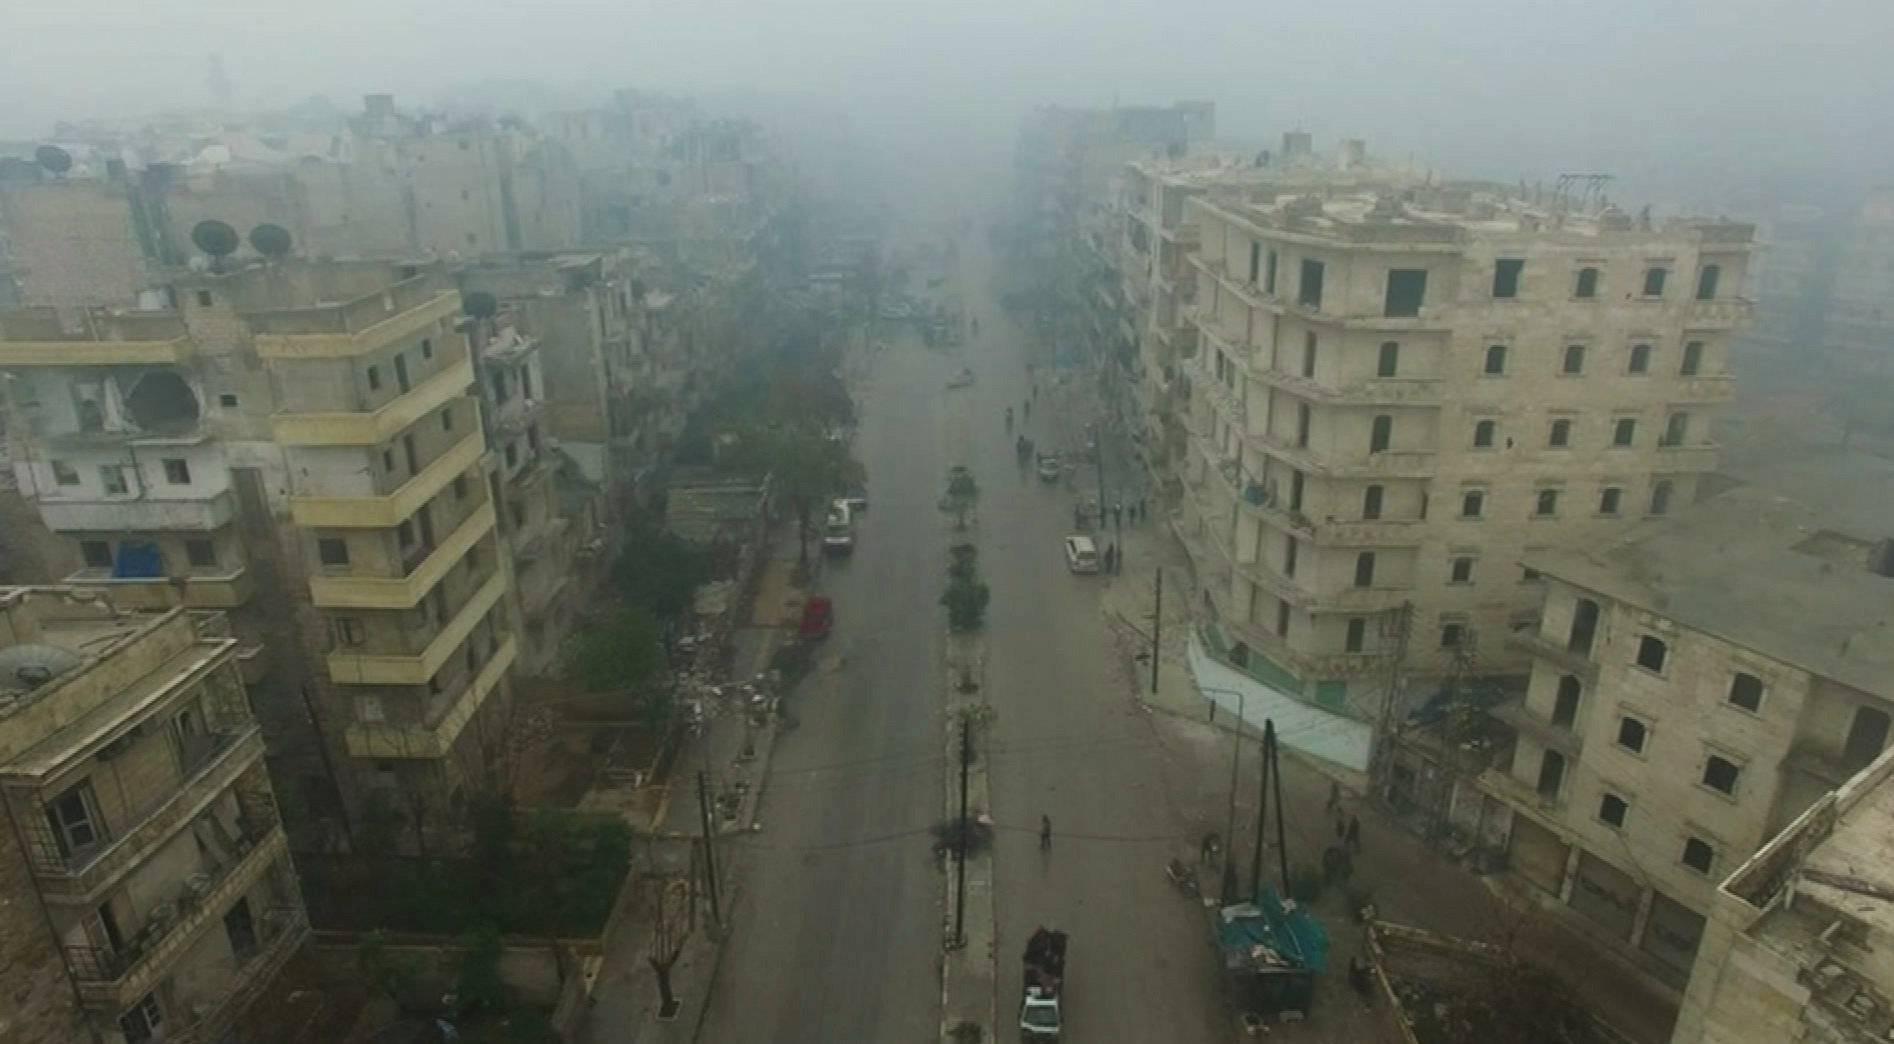 A still image from video taken December 13, 2016 of a general view of eastern Aleppo, Syria in the rain